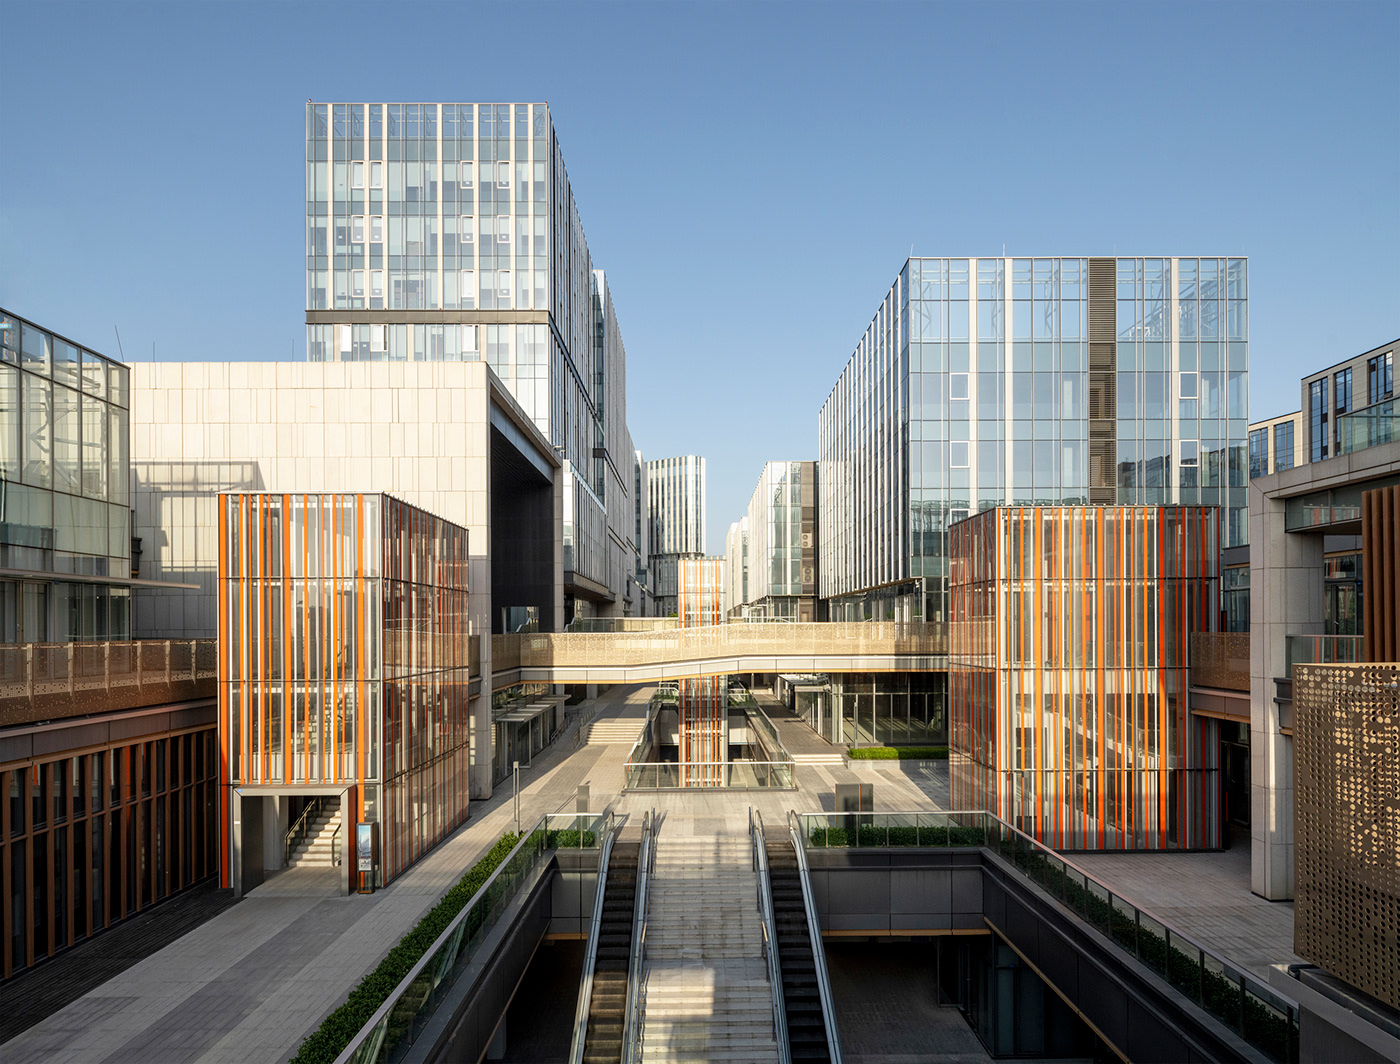 architecture built china Innovation Park Mixed-Use Office Retail